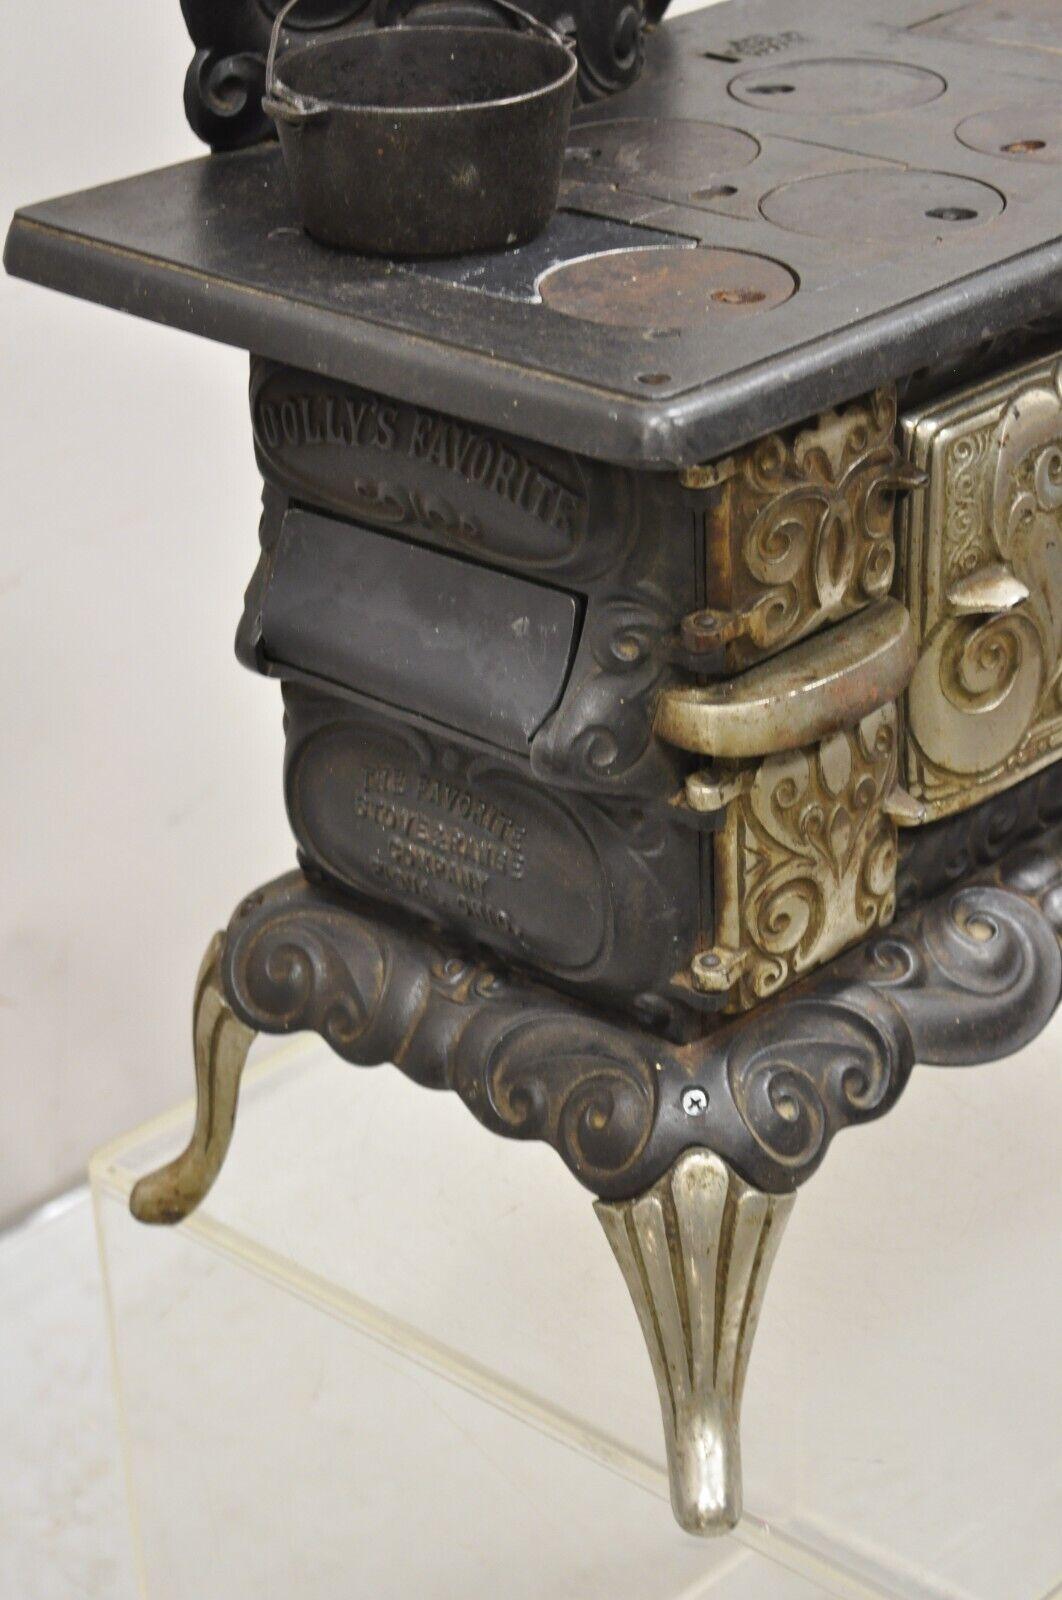 Antique Dollys Favorite Cast Iron Childs Salesman Sample Stove by Favorite Stove For Sale 5